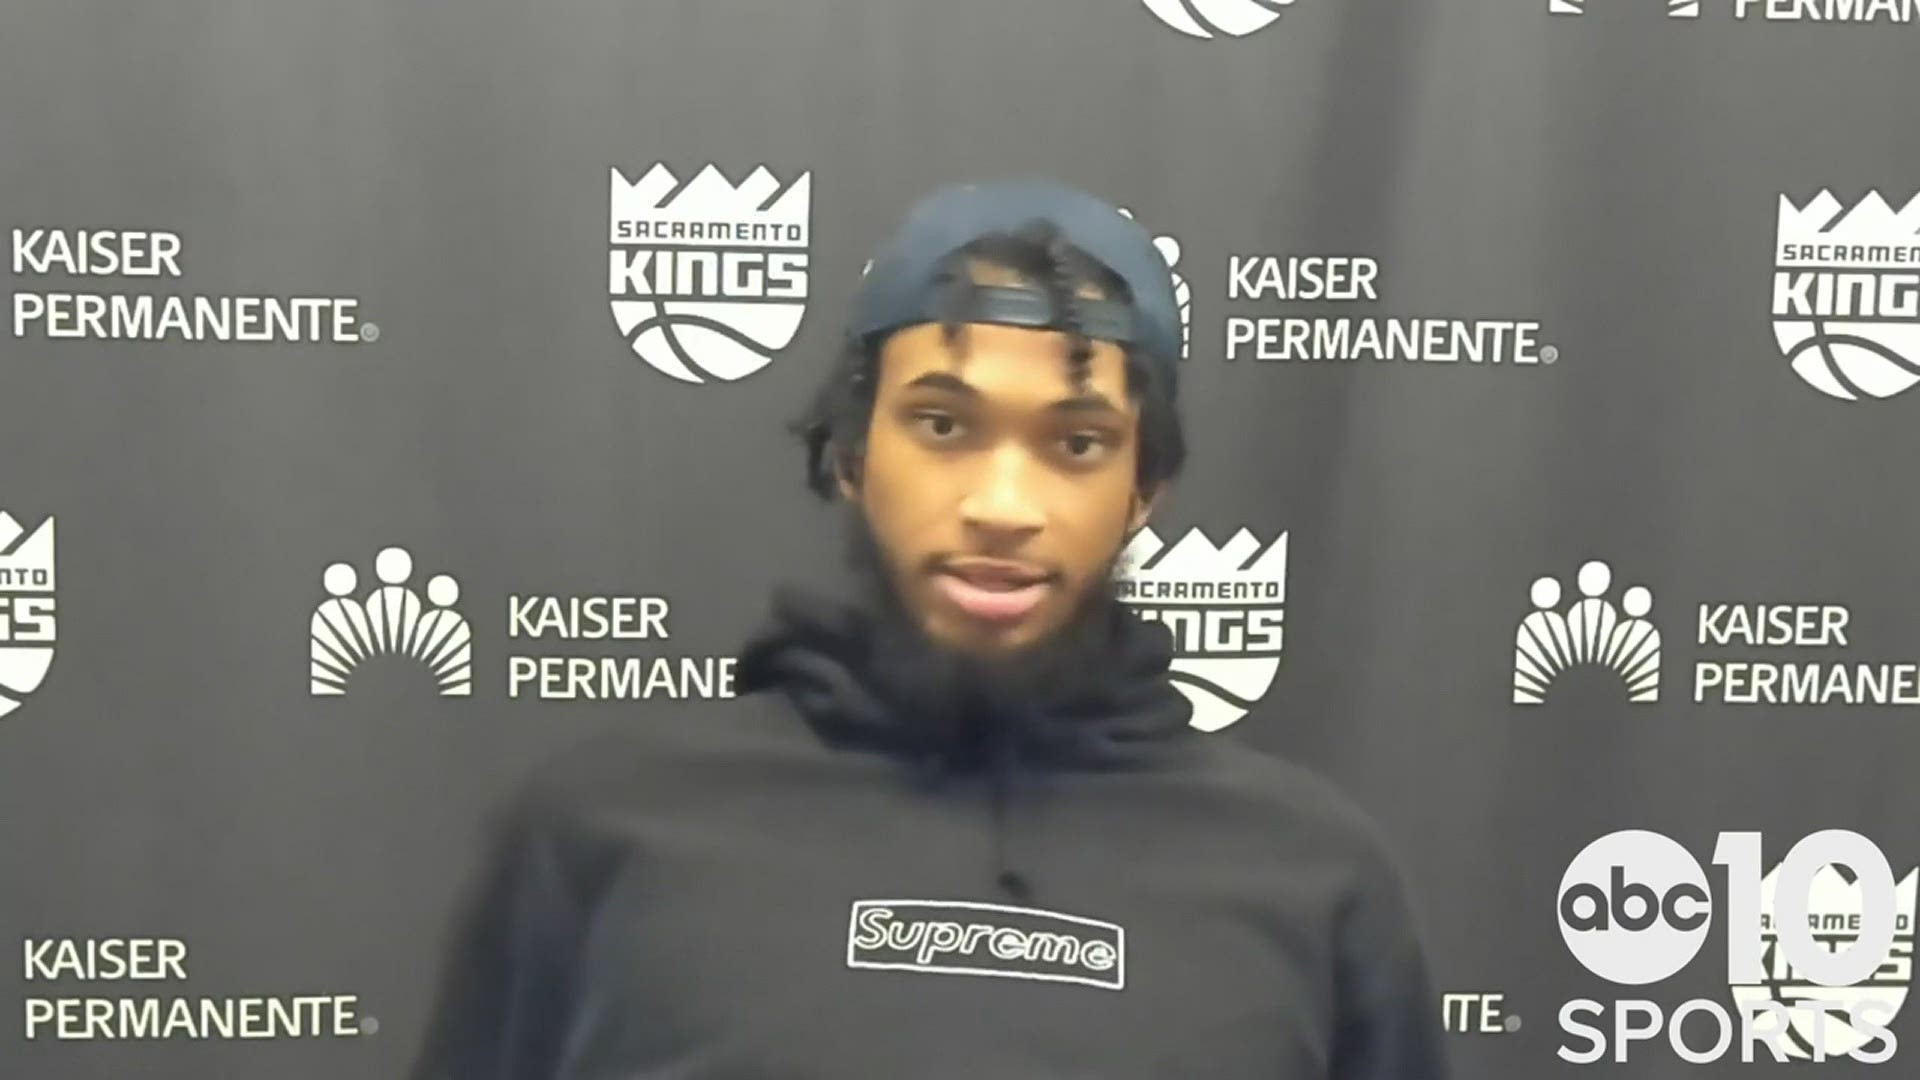 Marvin Bagley III, following his 31-point, 12 rebound performance on Wednesday, talks about getting Sacramento's fourth straight road win in the Kings' 104-93 win.